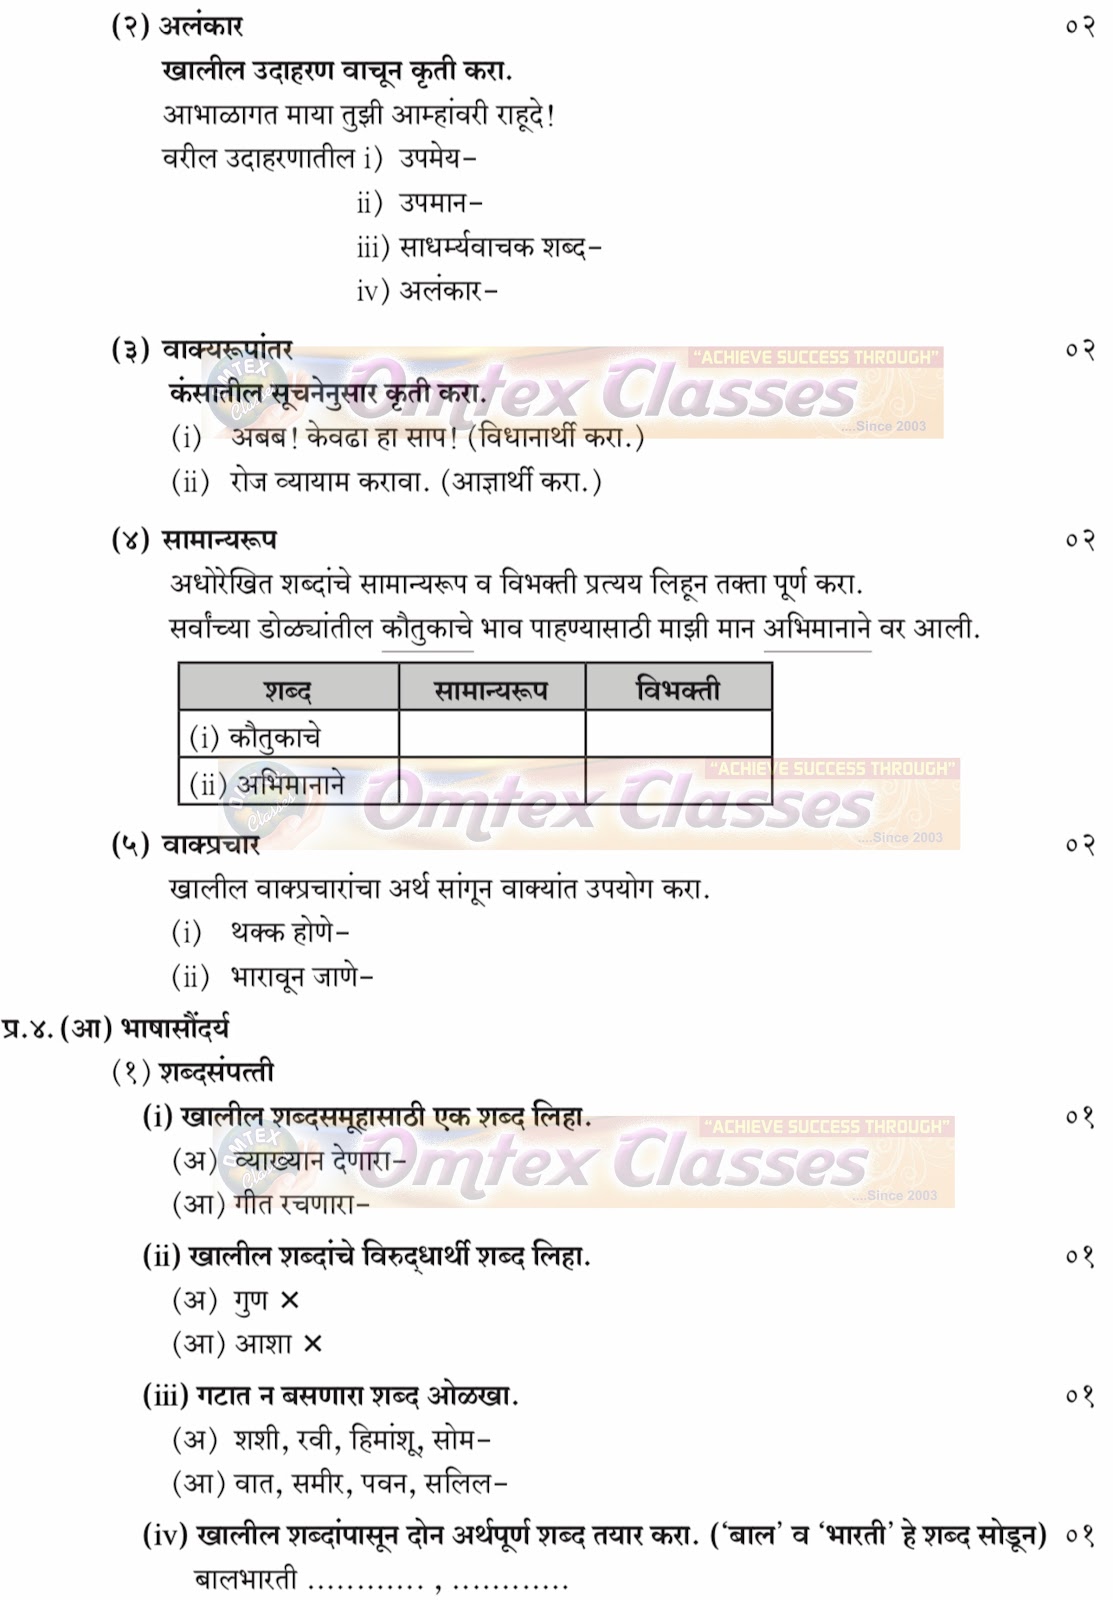 10th marathi grammar pdf download free crm software for small business download